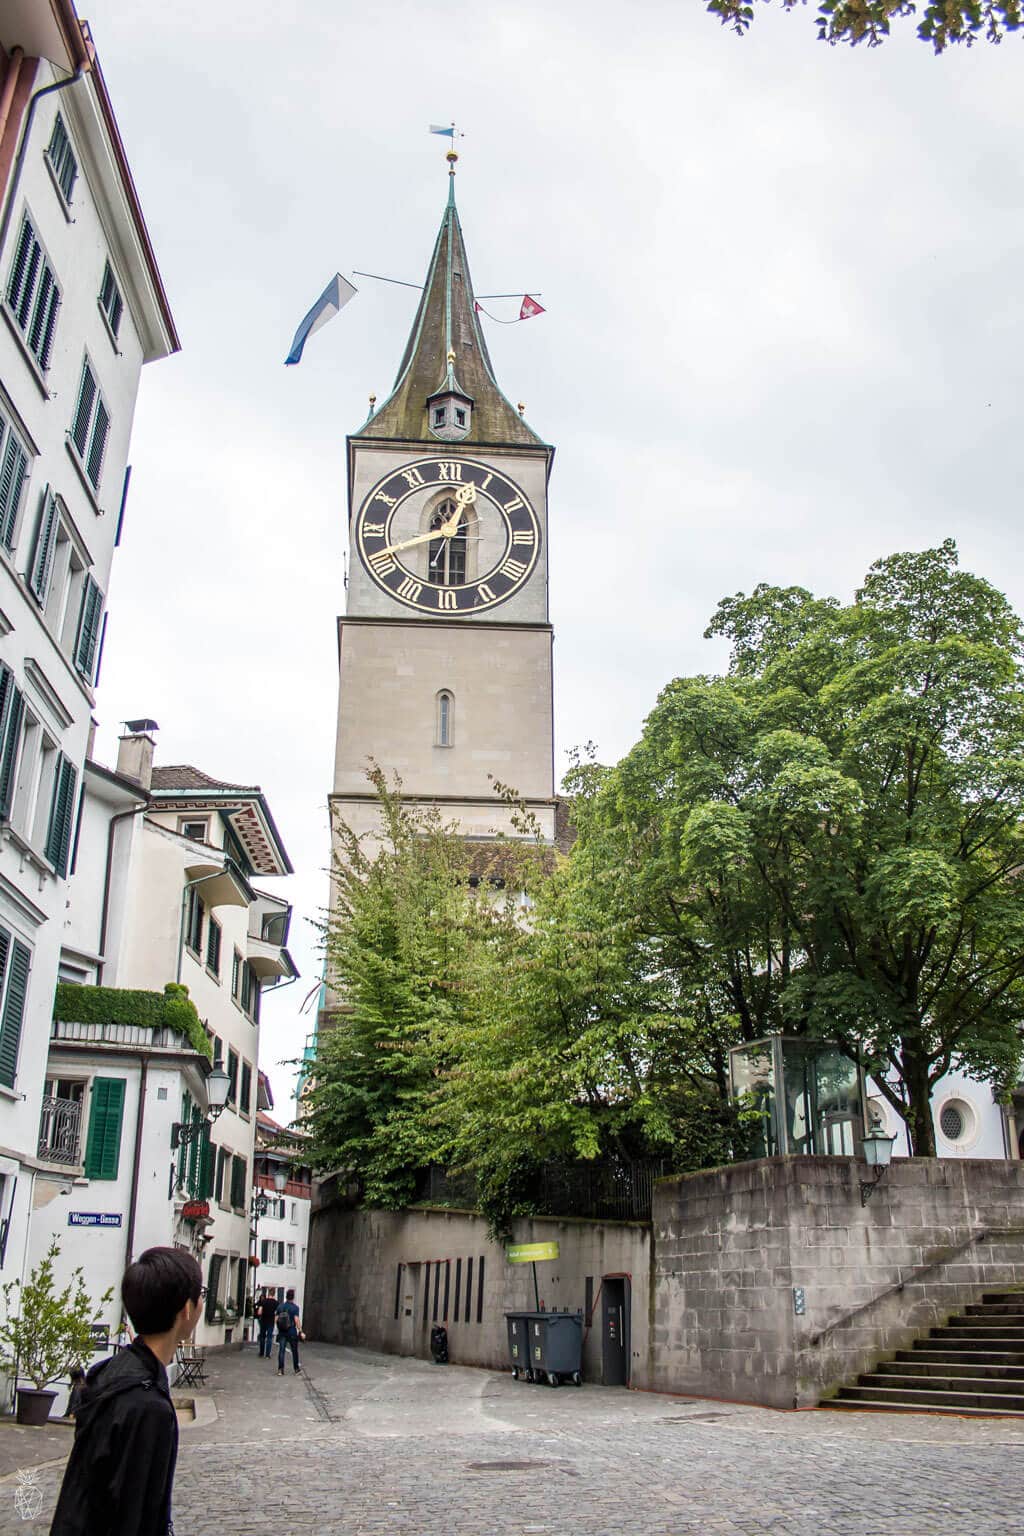 6 Things You Have To Do In Zurich, Switzerland